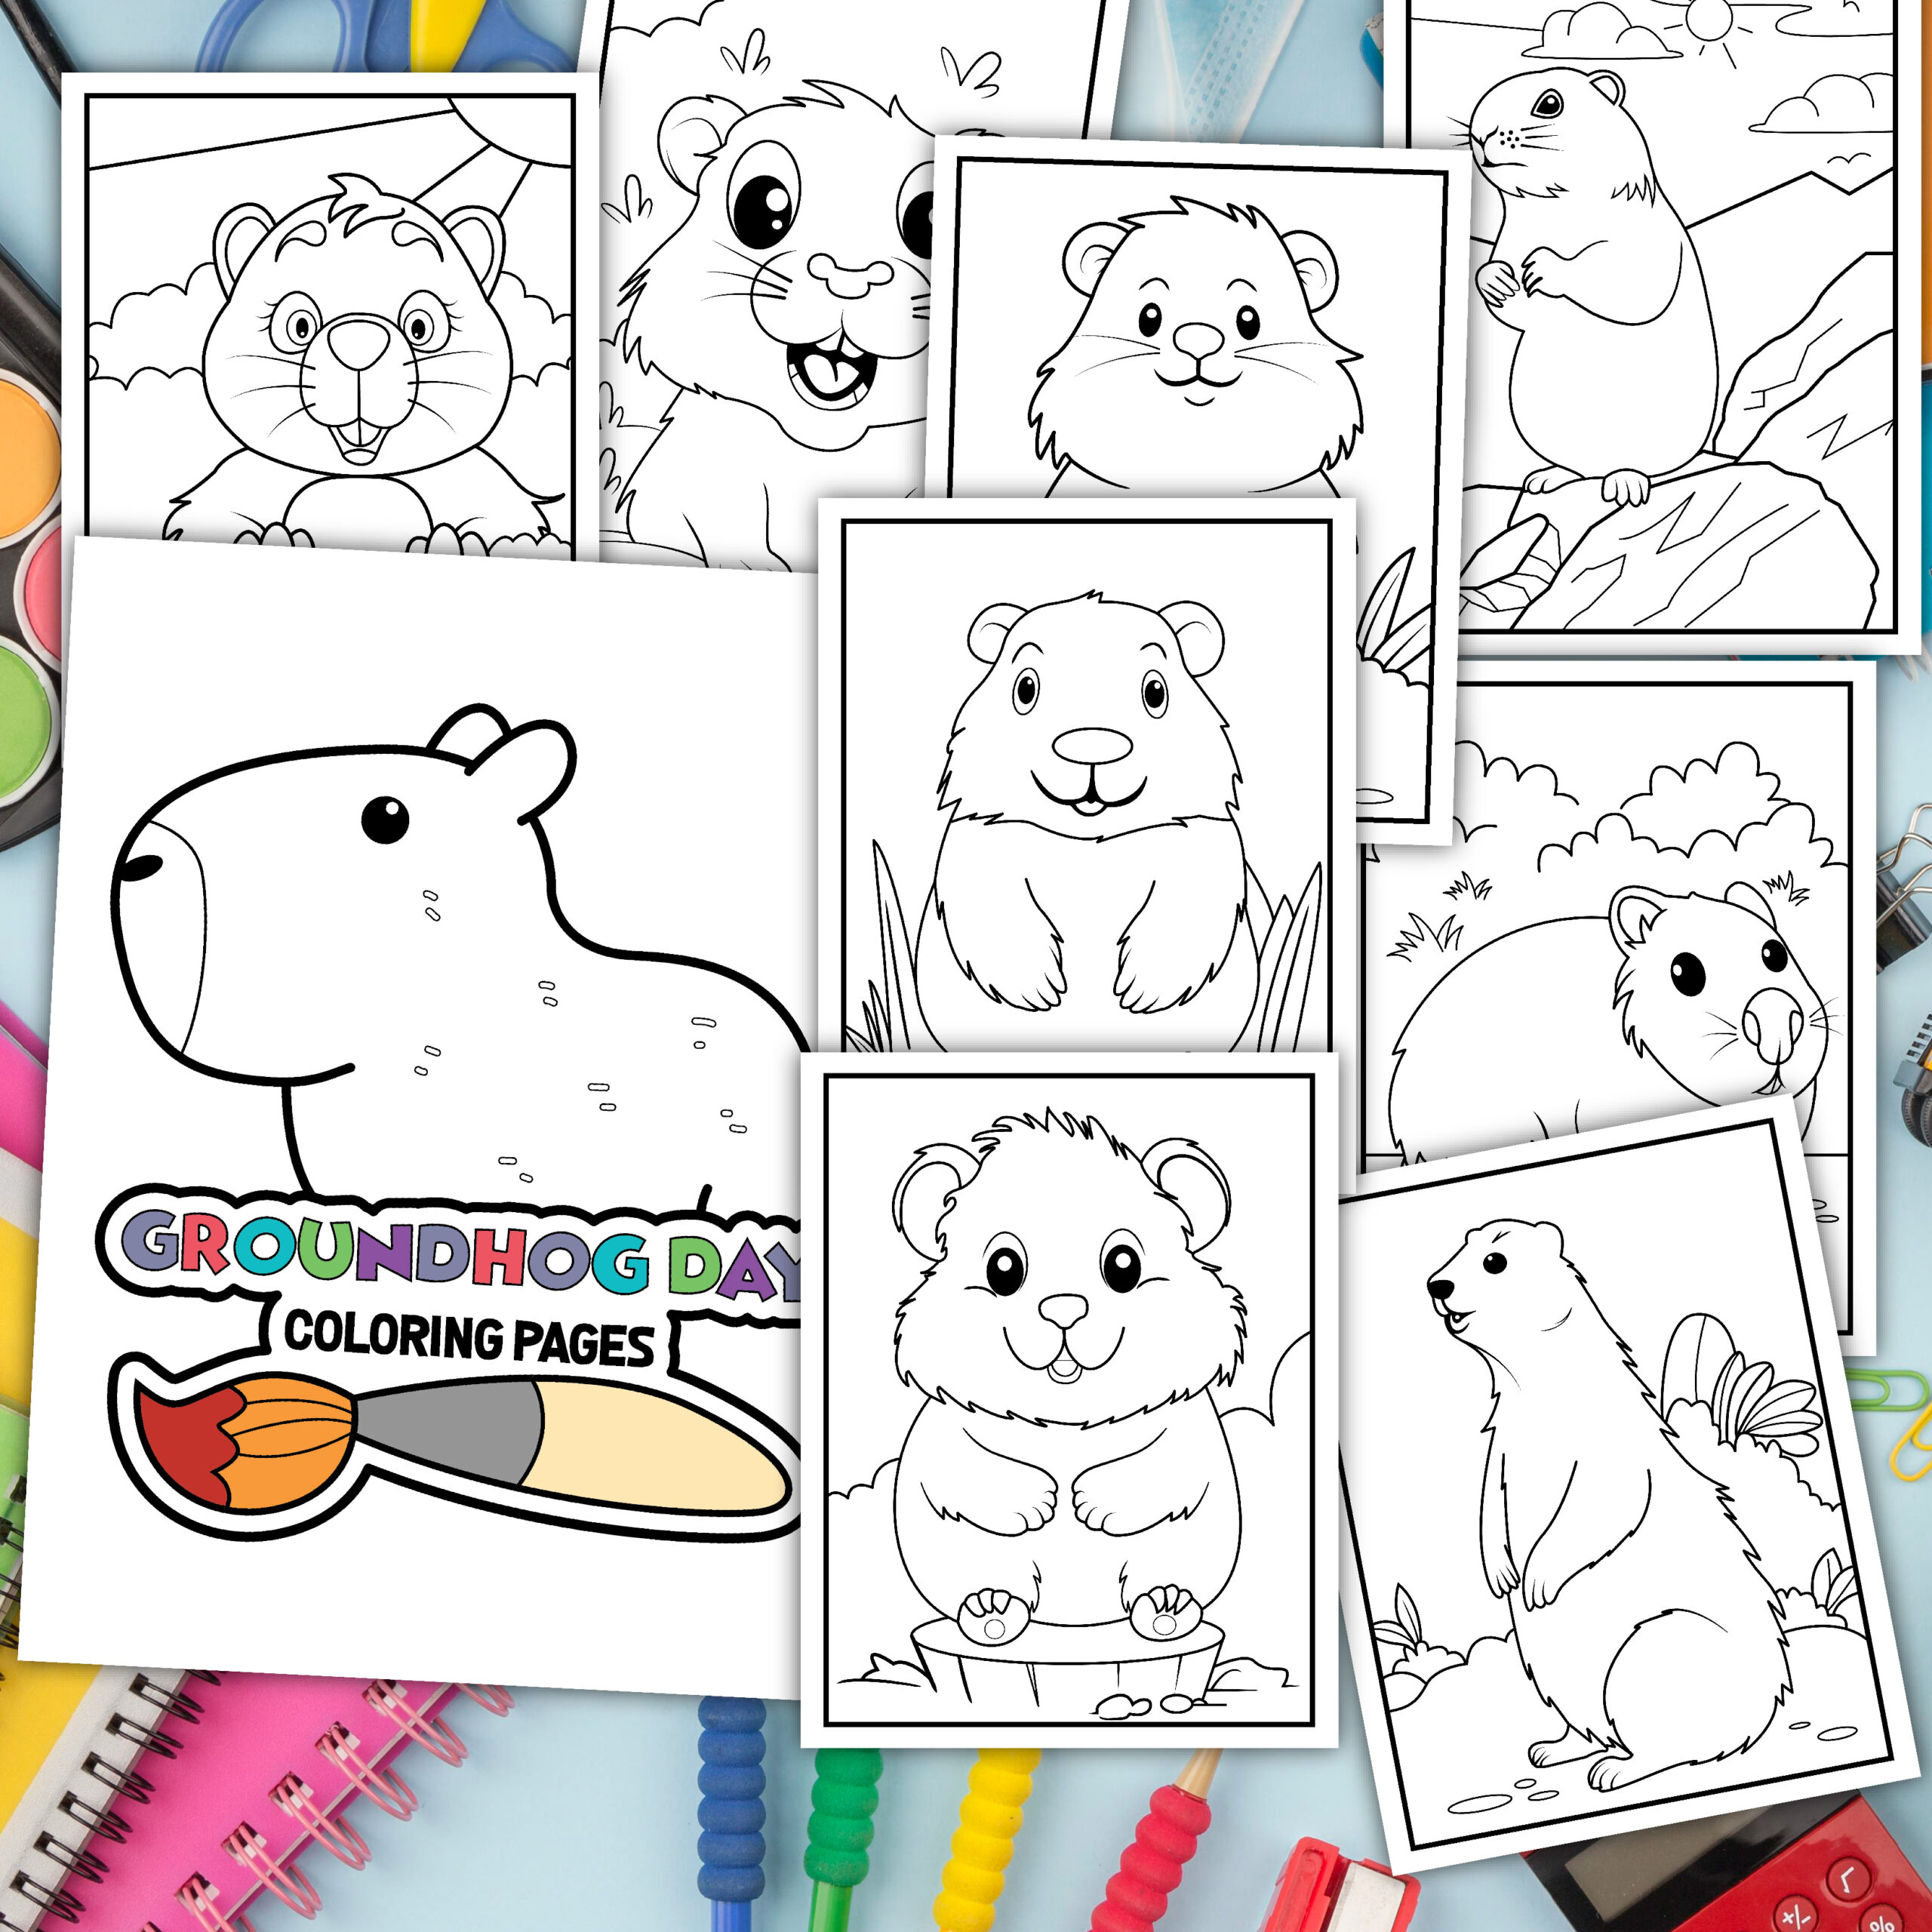 Free groundhog day coloring pages sheets